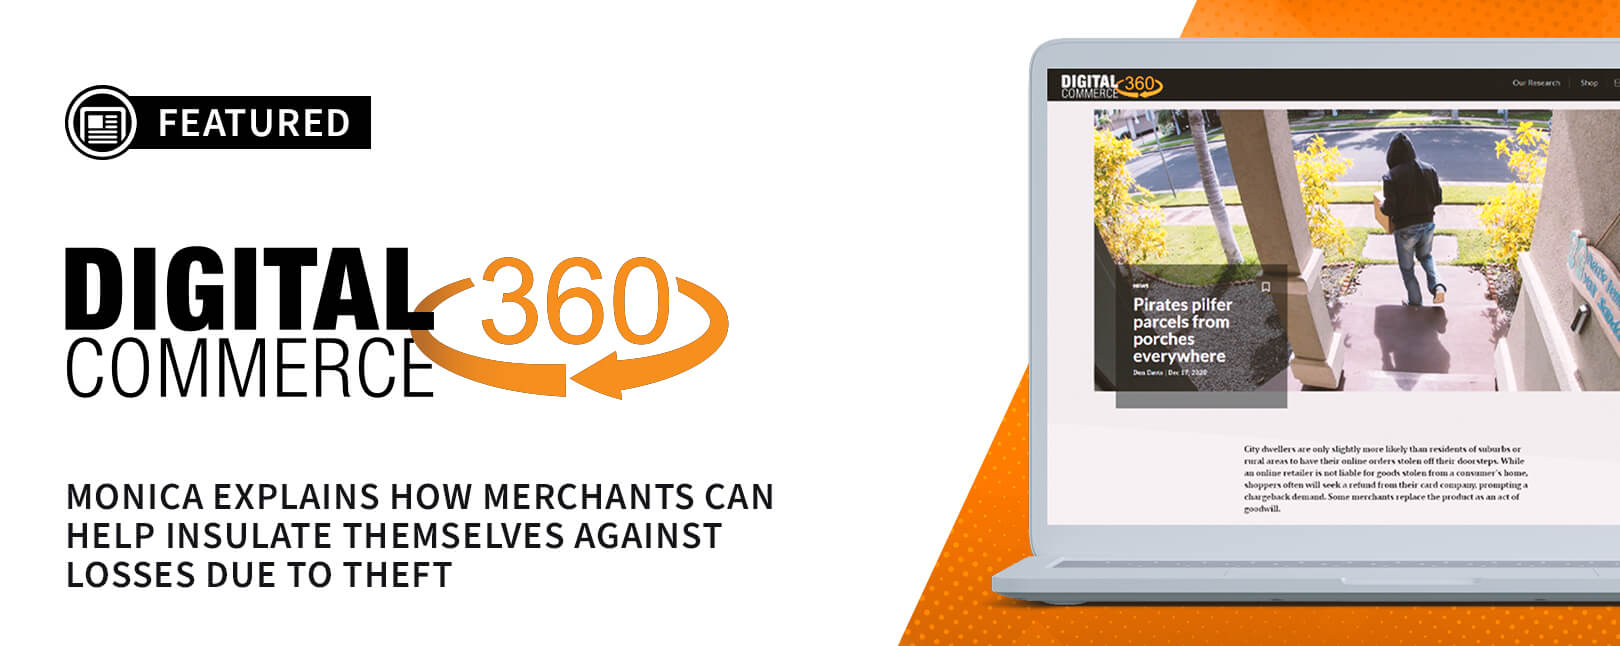 Chargebacks911® COO Comments on Porch Piracy for Digital Commerce 360